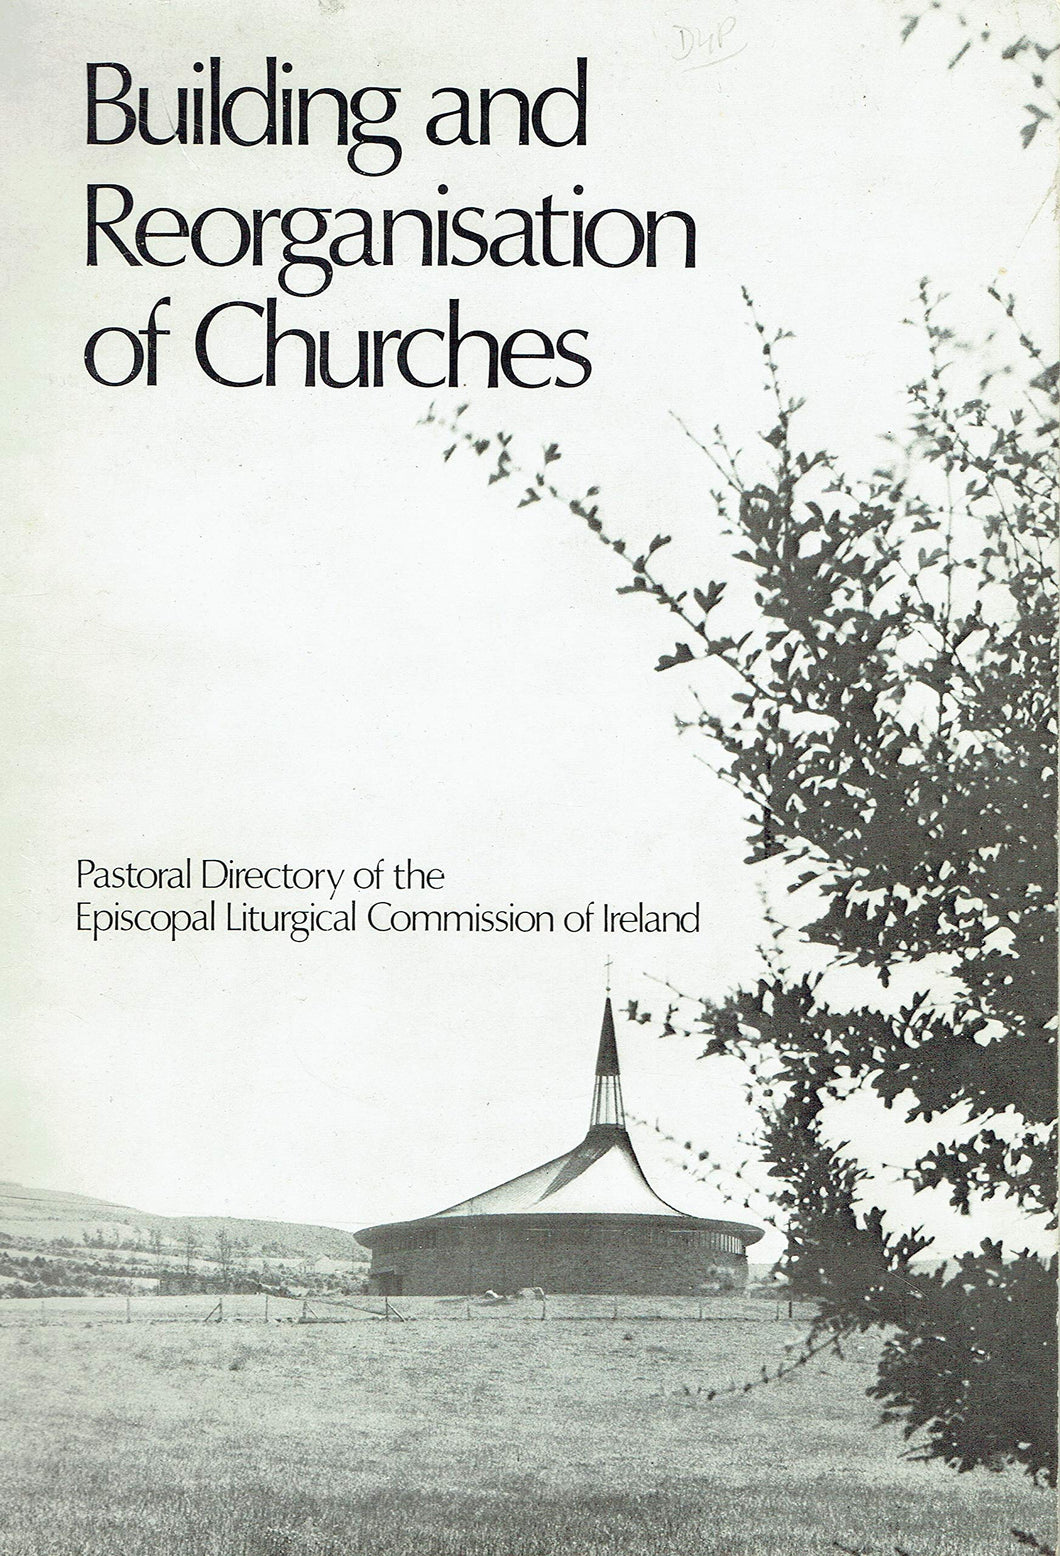 Building and Reorganisation of Churches: Pastoral Directory of the Episcopal Liturgical Commission of Ireland